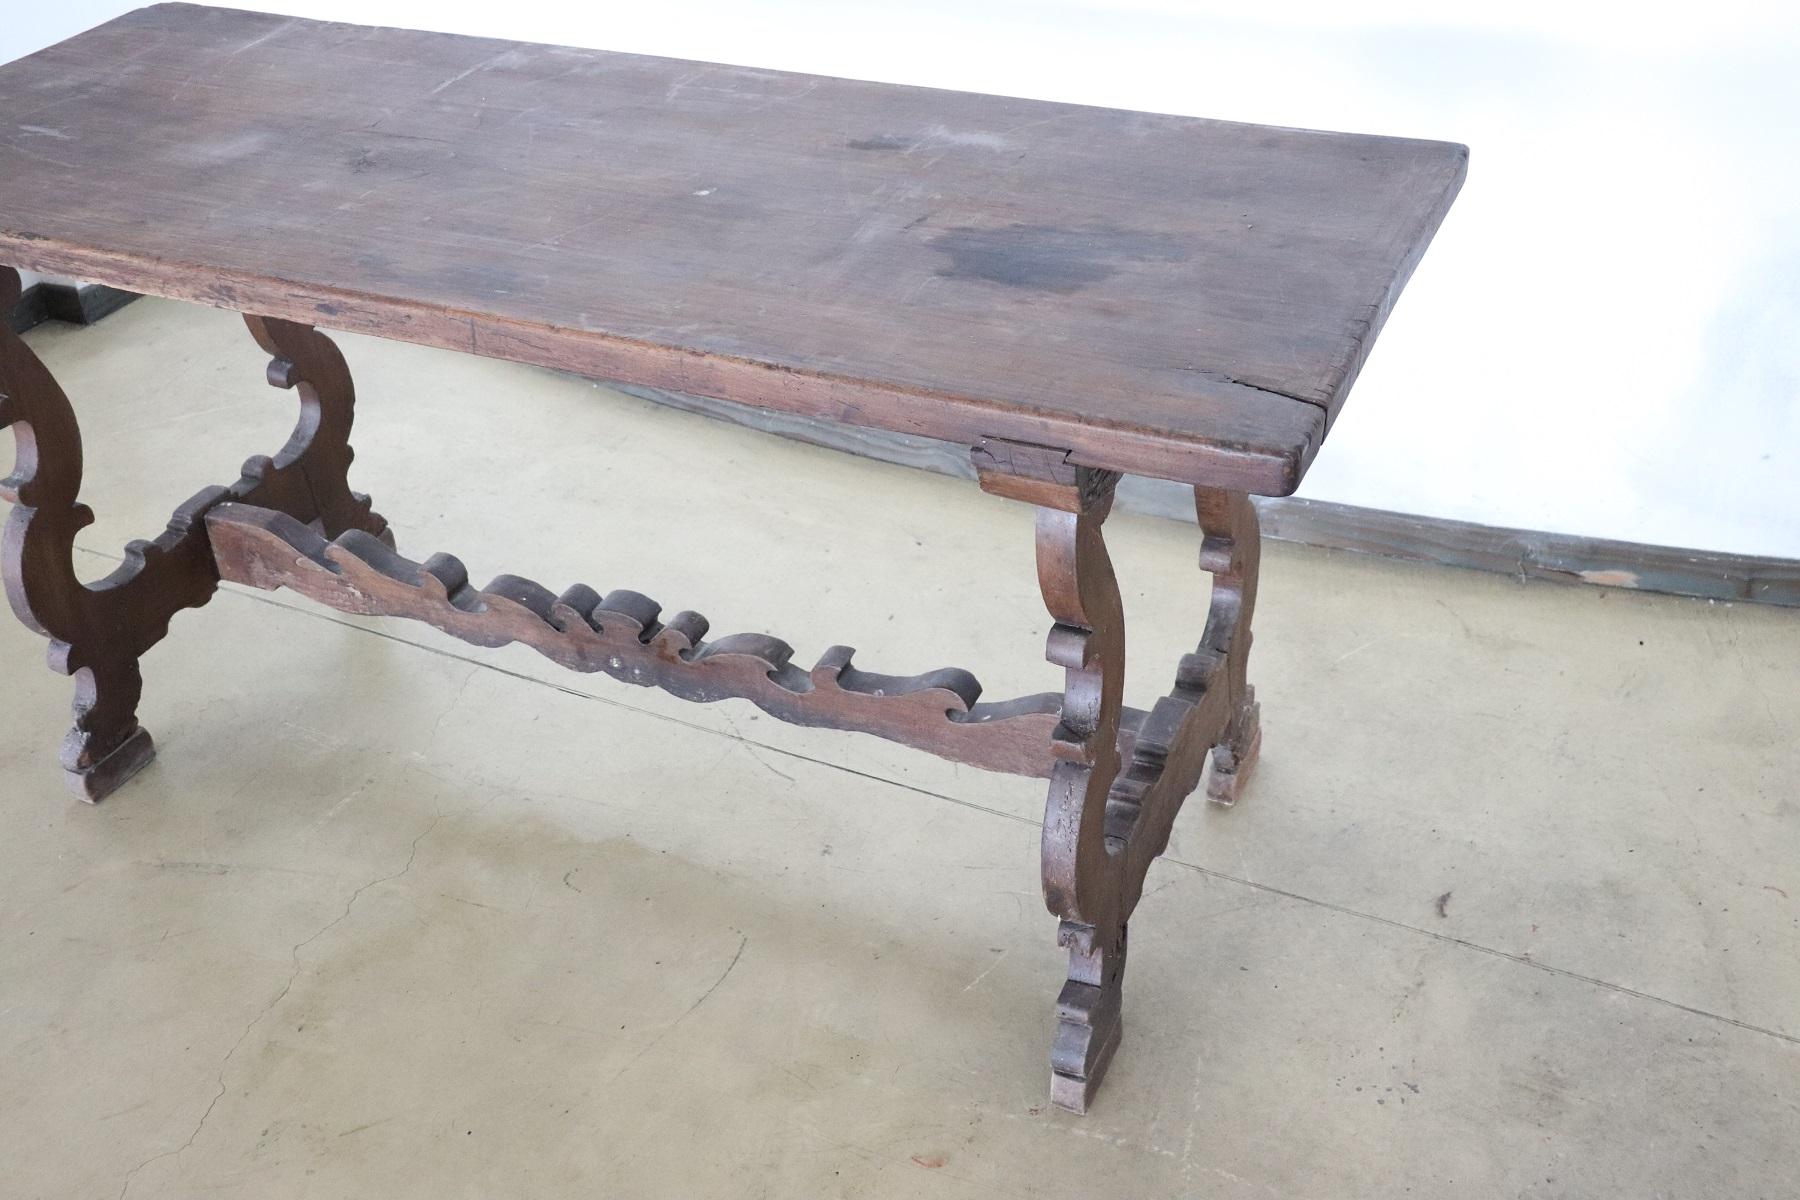 Important antique solid walnut table from the early 17th century. Walnut wood has acquired a beautiful antique patina presenting the signs of all the past centuries. This type of table in Italy was called 